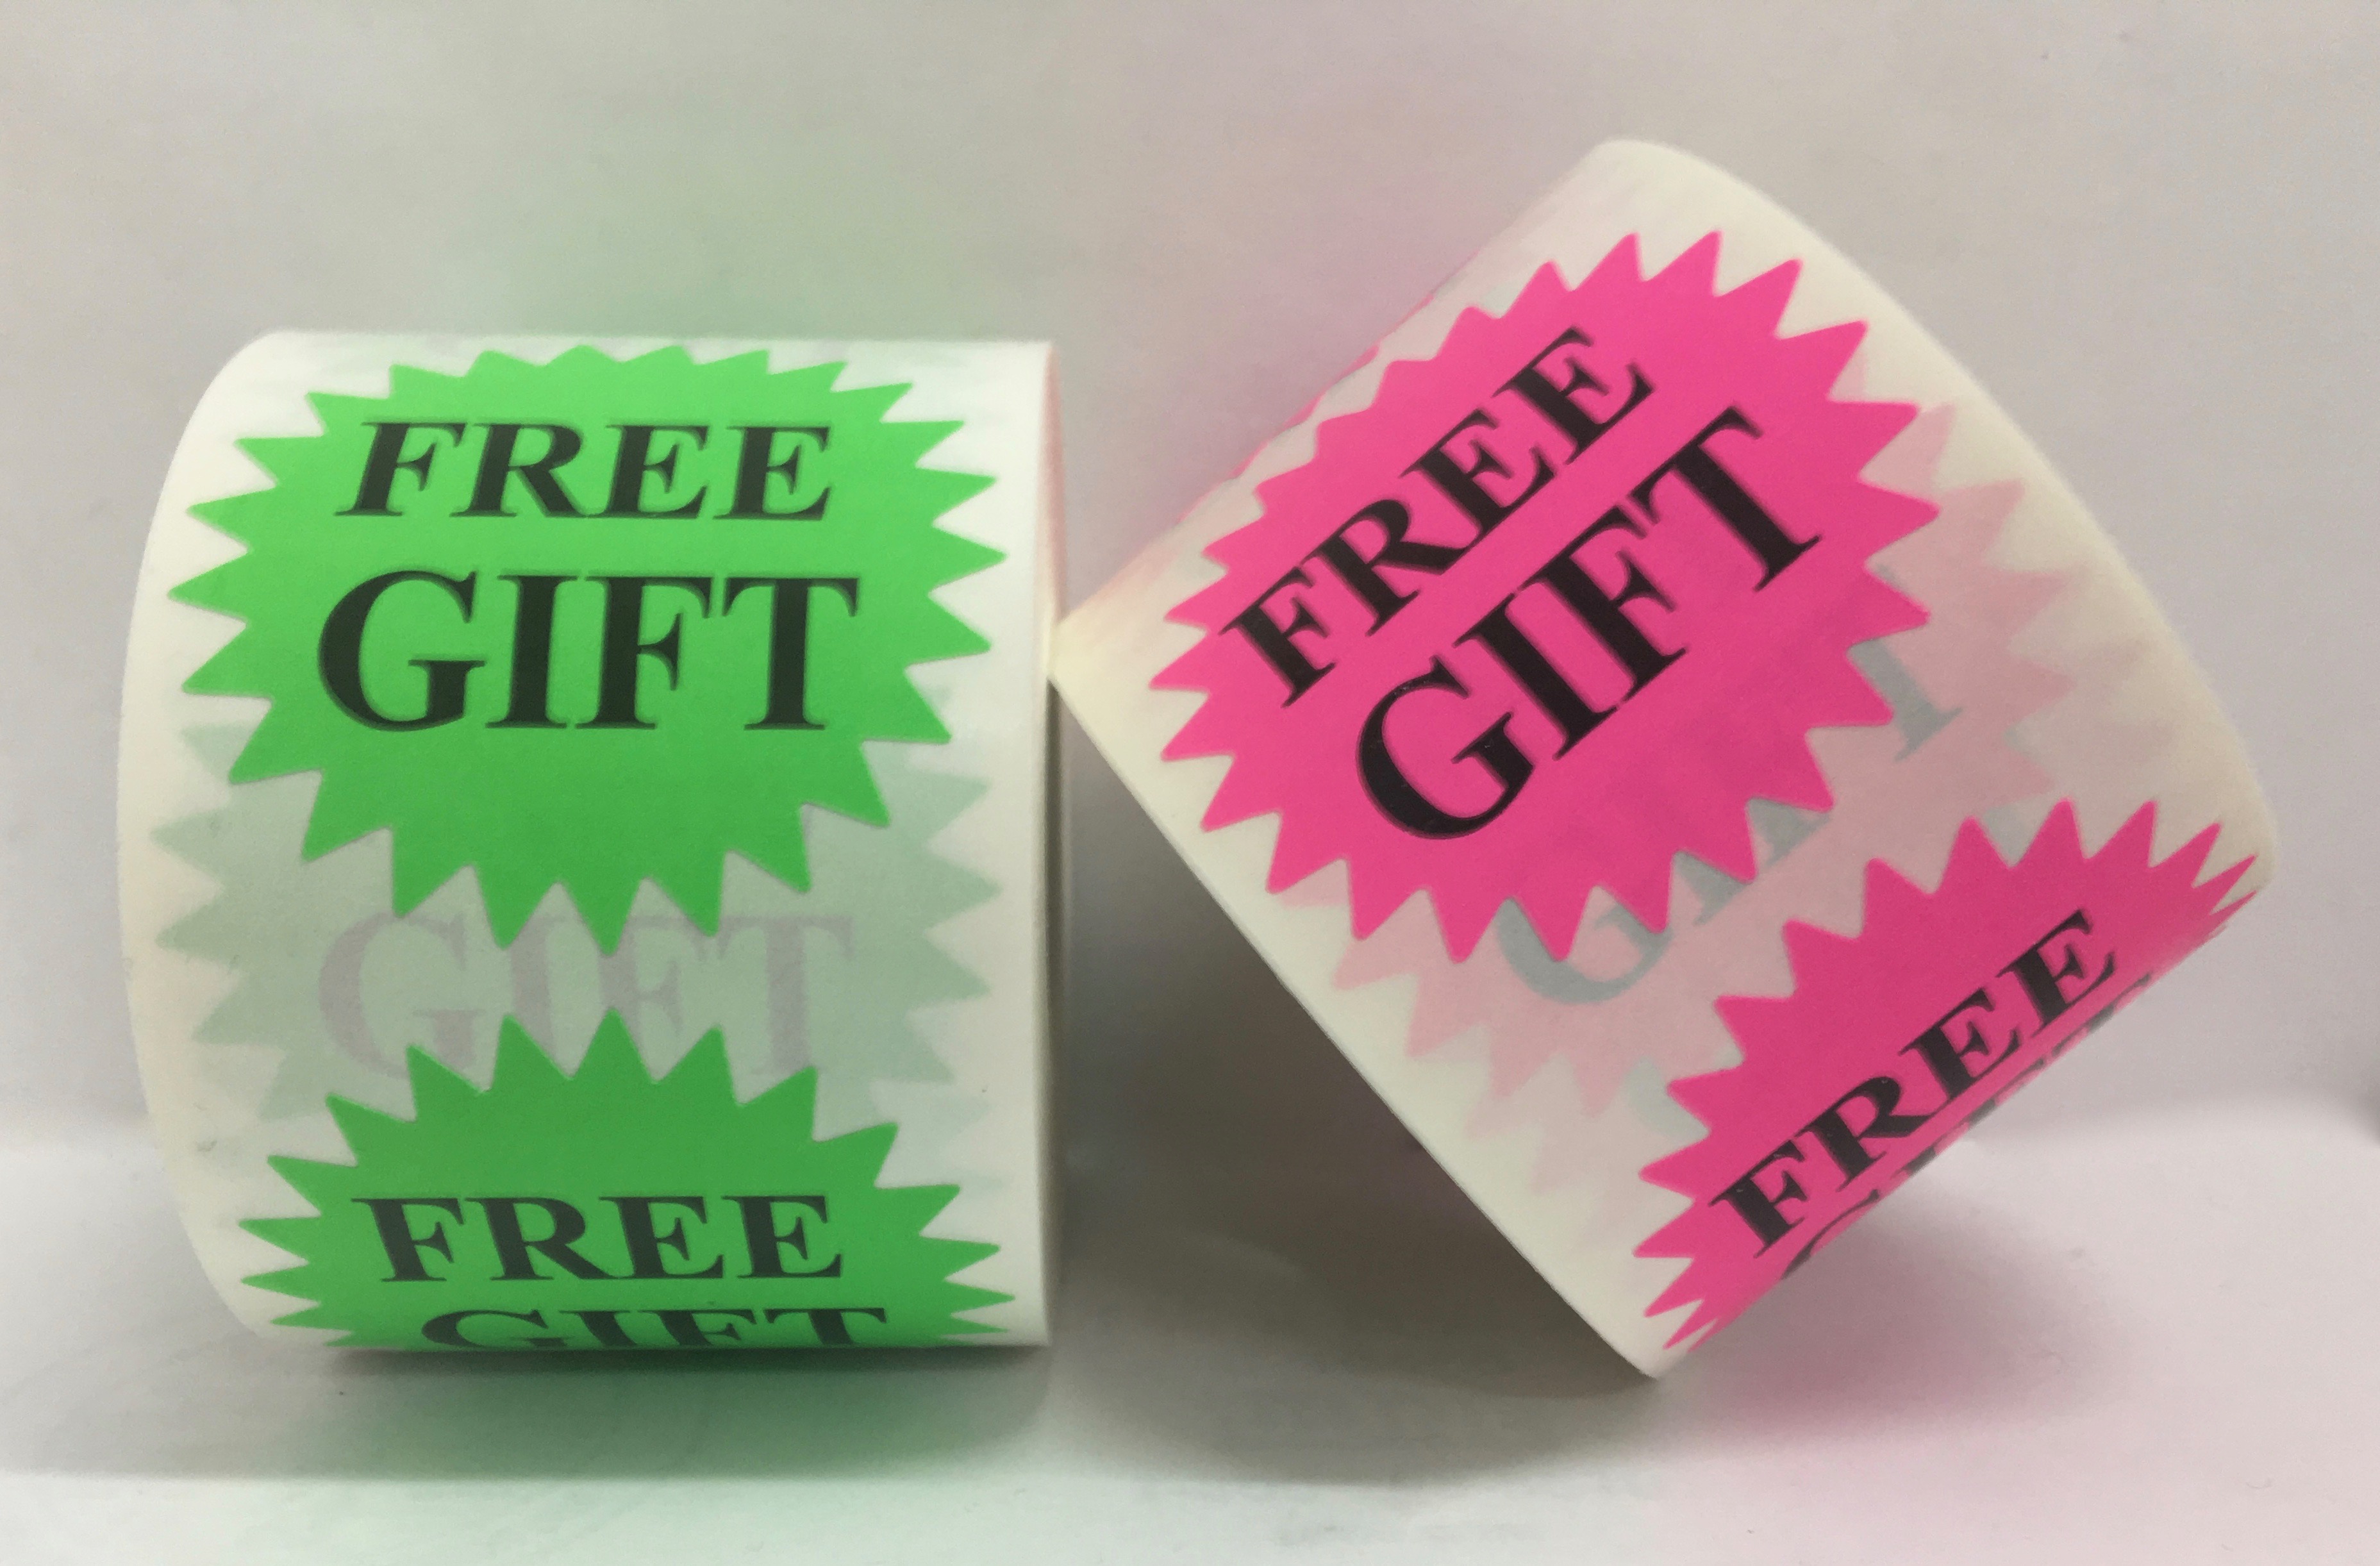 Starburst 'FREE GIFT', 500 Labels GREEN and 500 Labels PINK for a total of 1000 LABELS